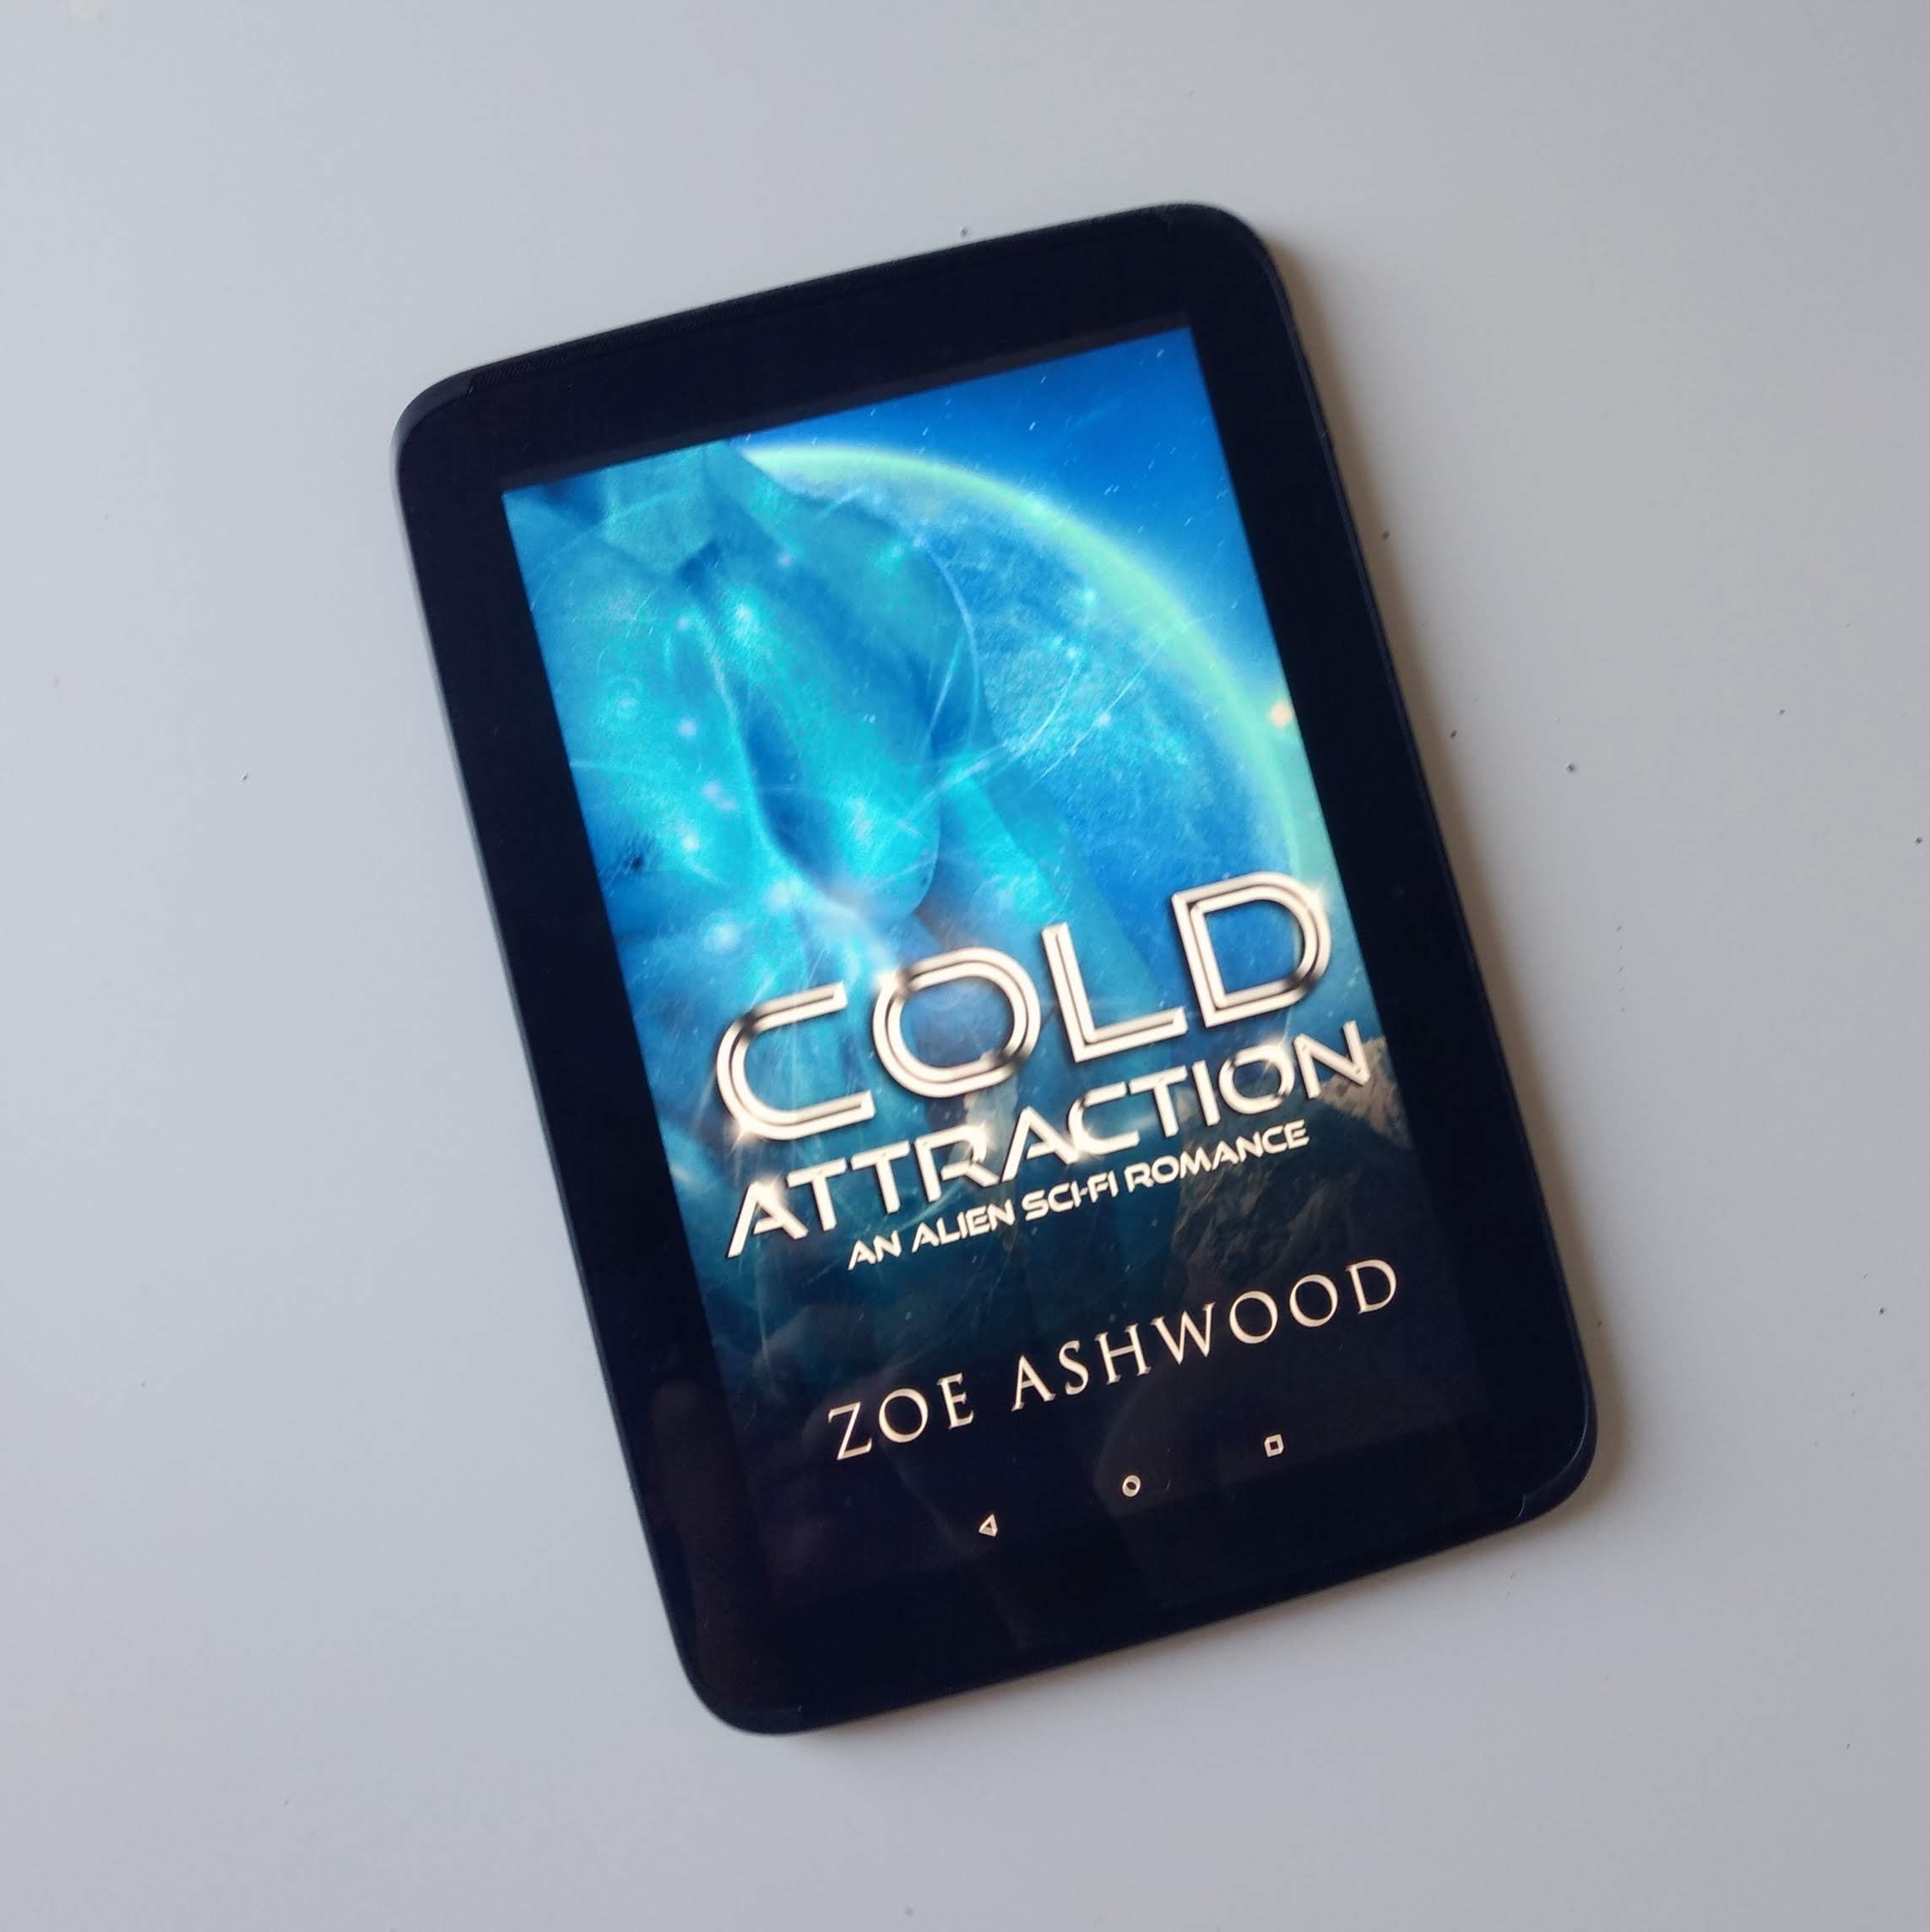 Cold Attraction by Zoe Ashwood